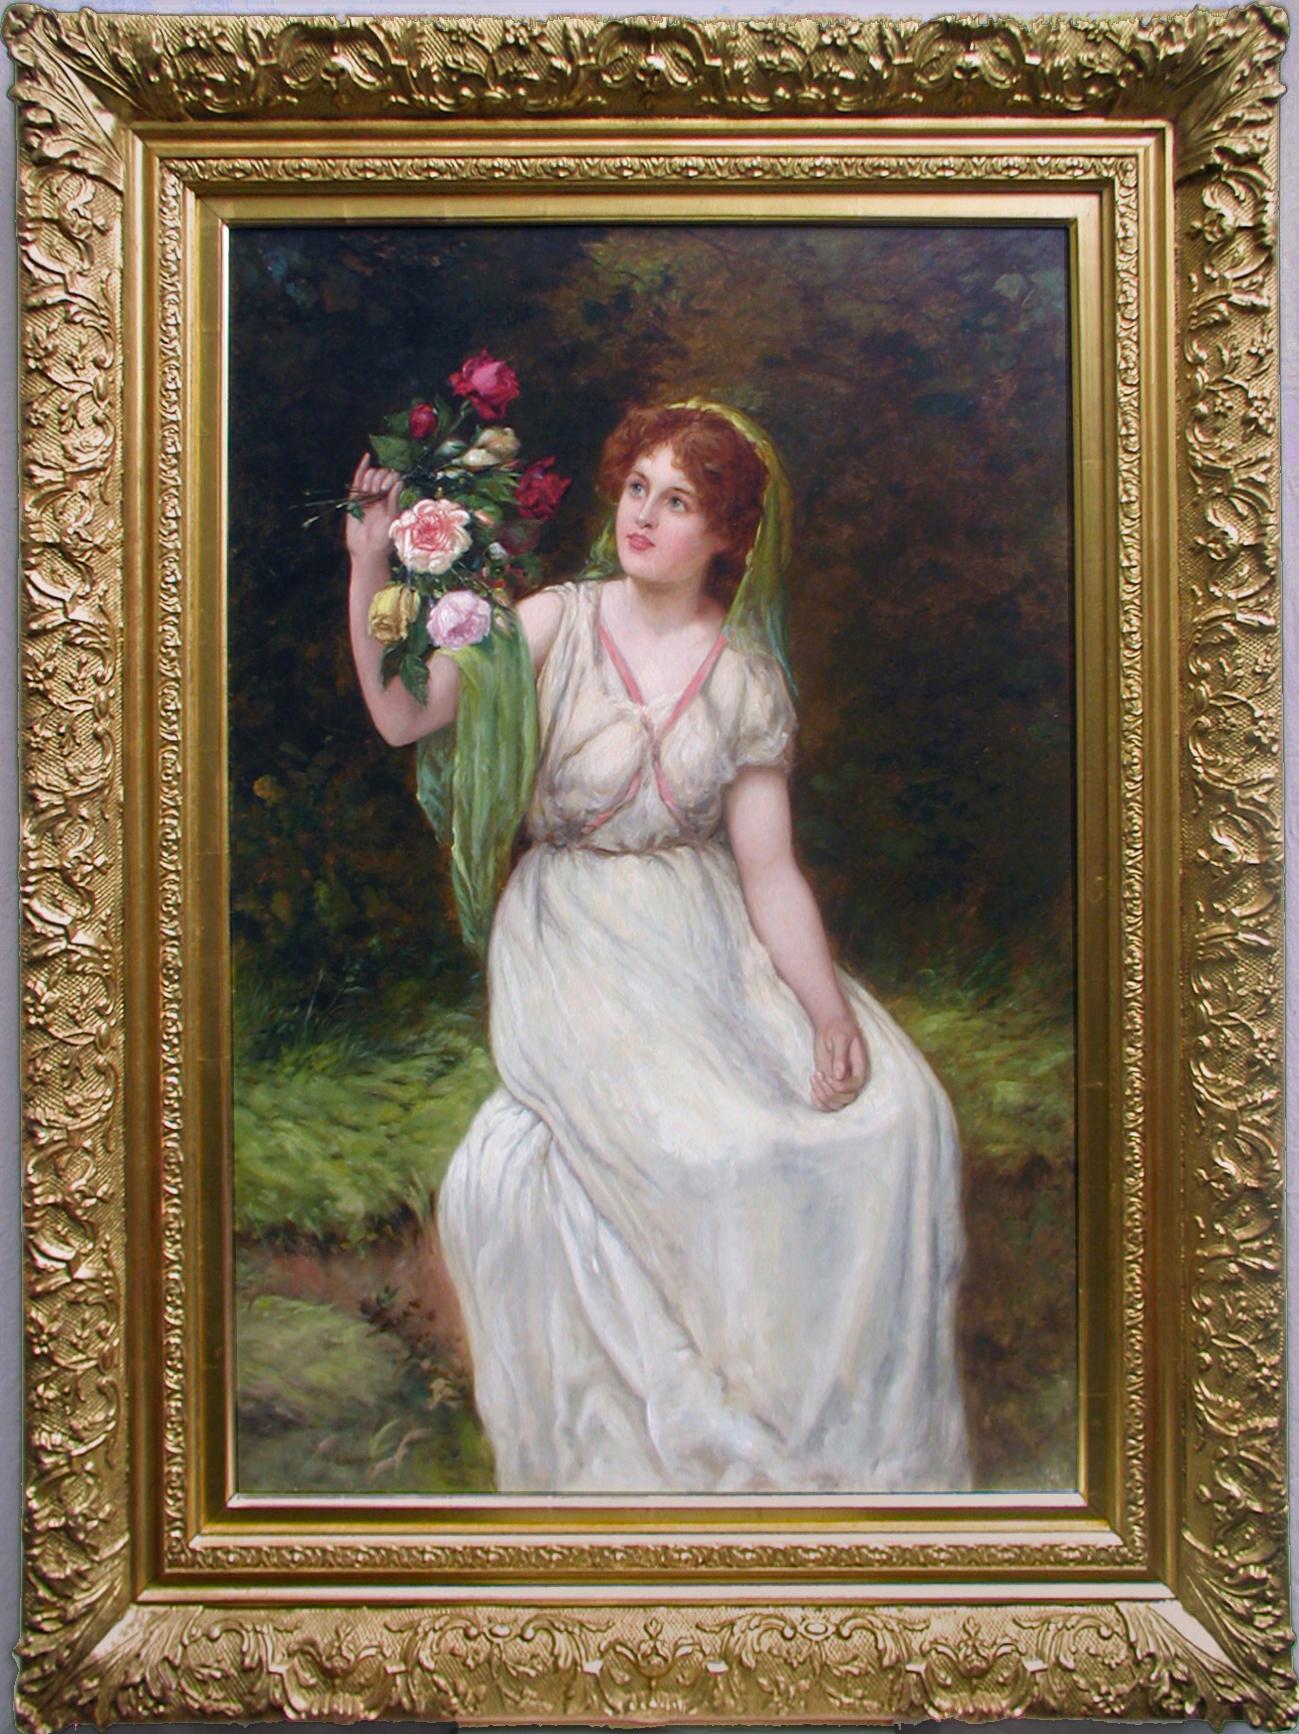 William Oliver Figurative Painting - 19th Century genre painting of a maiden holding flowers